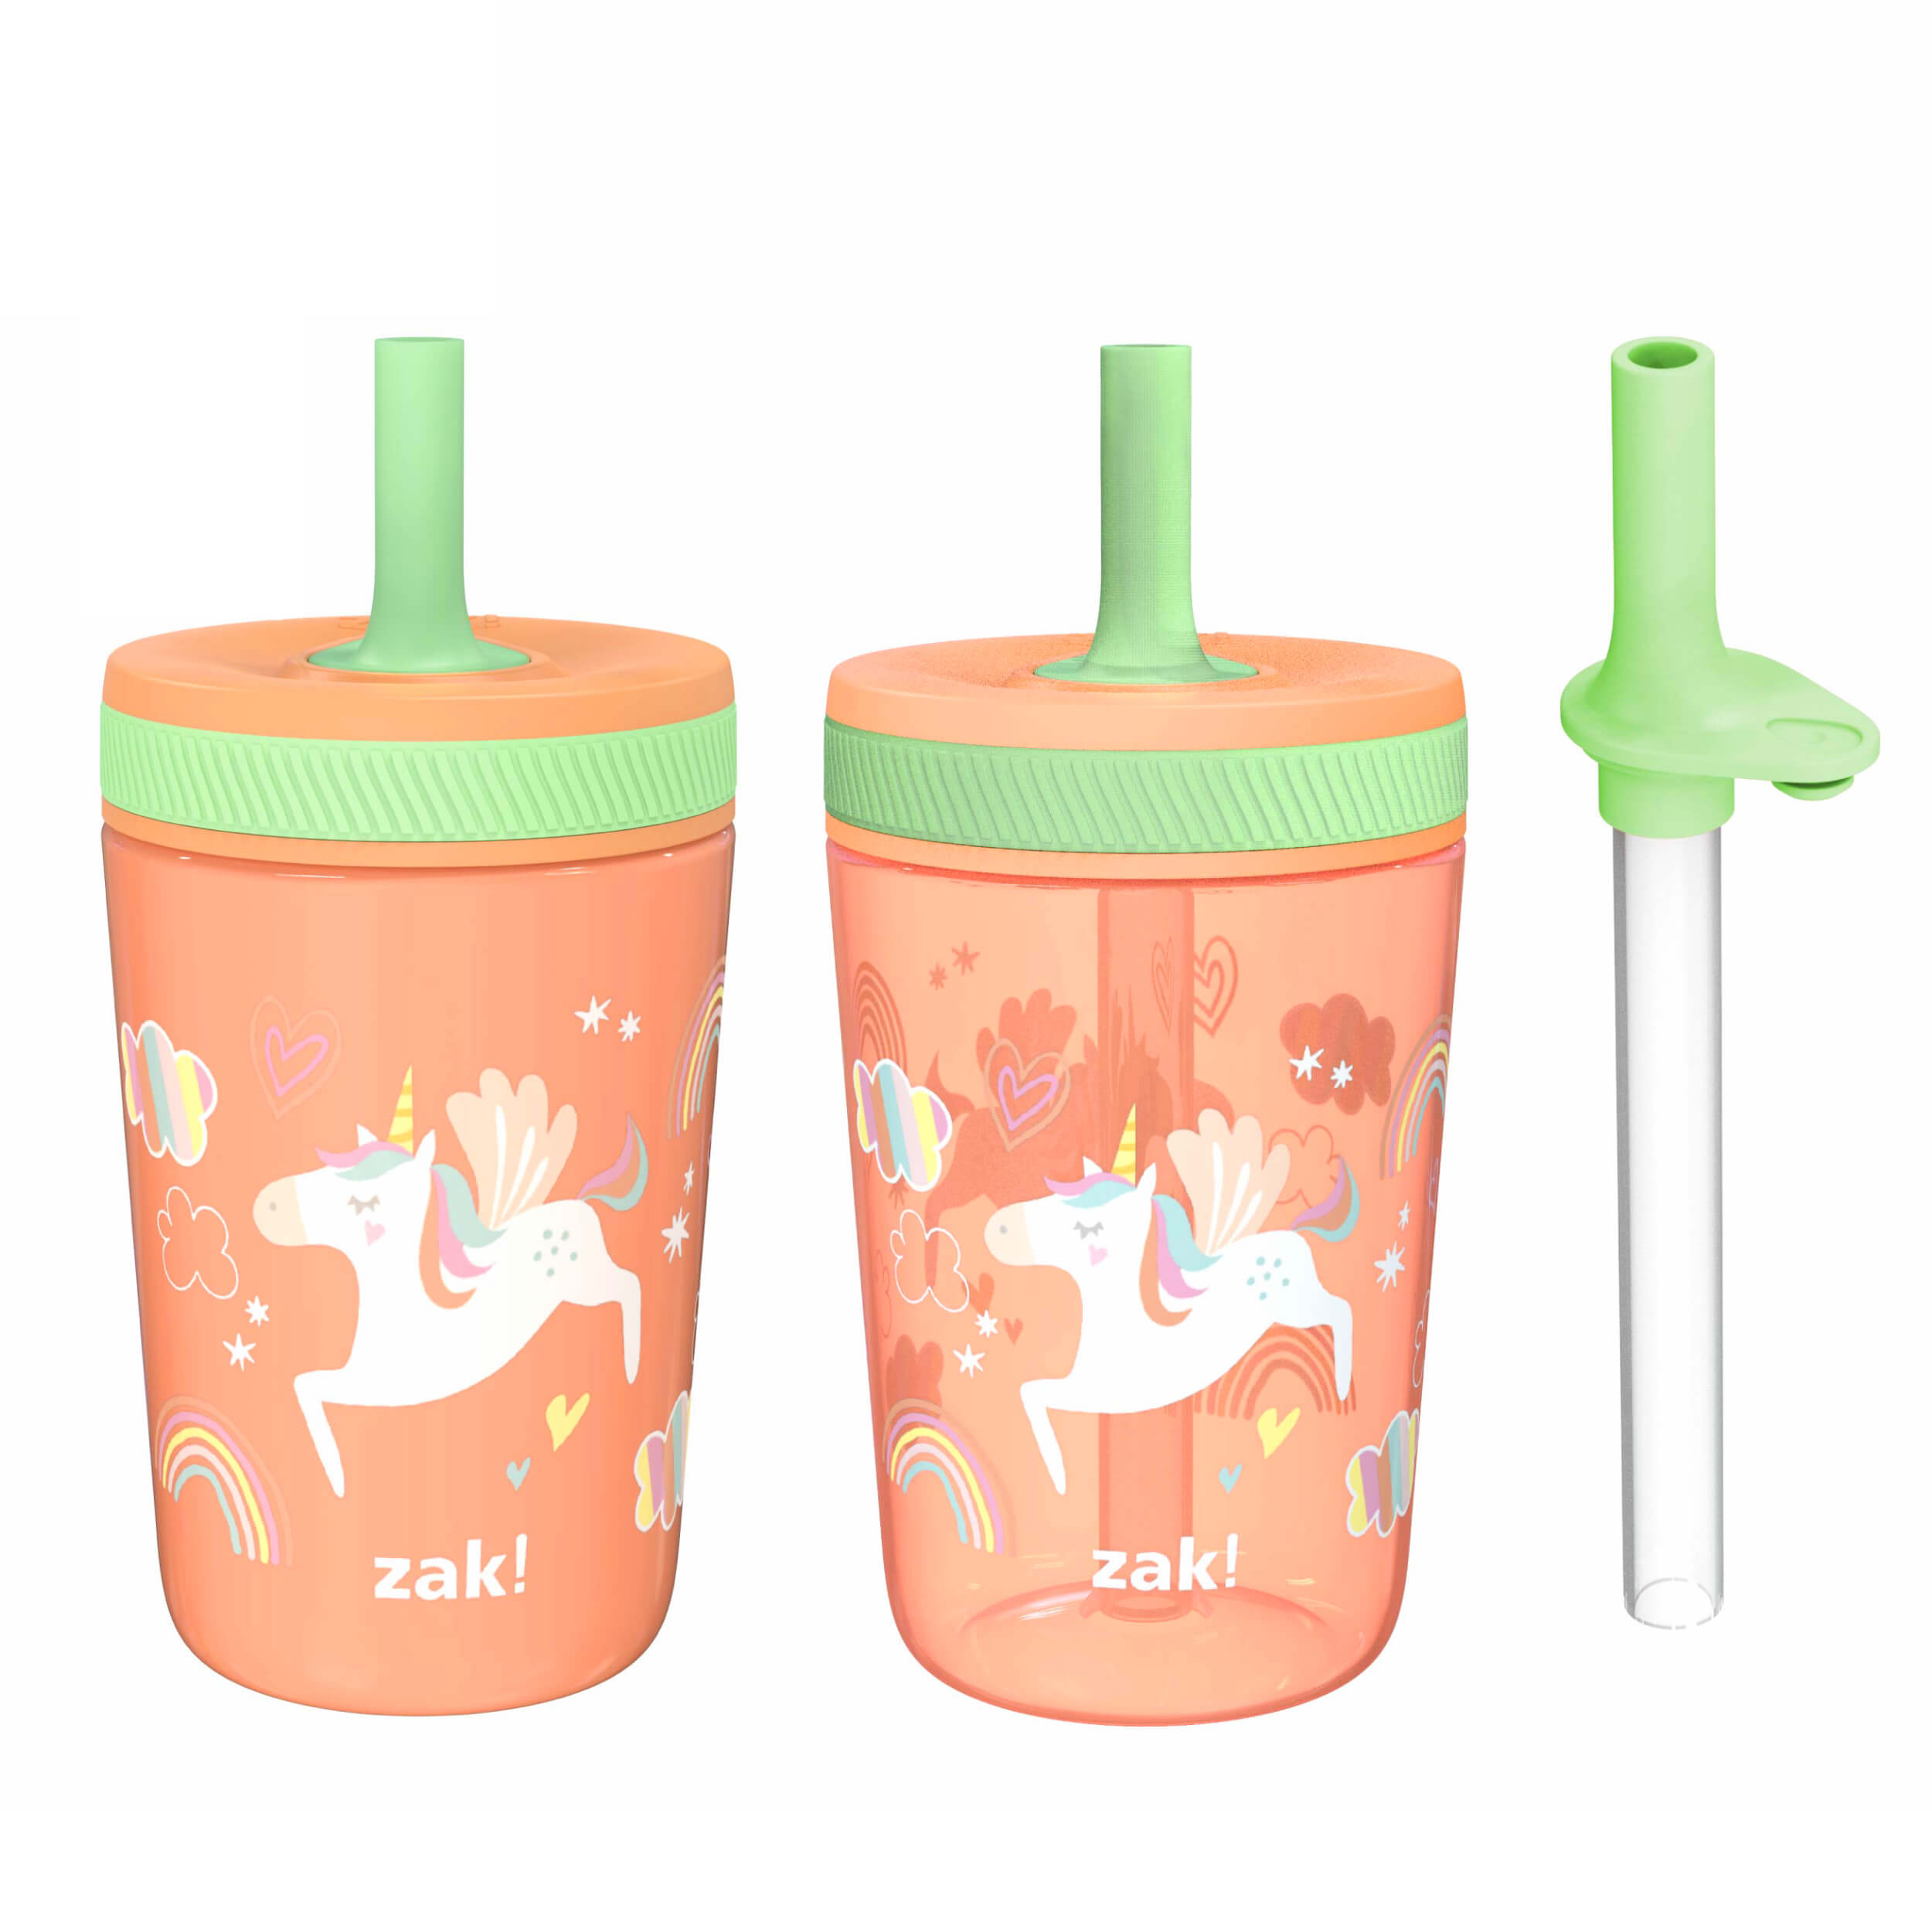 2 Pk Spill Proof Tumbler Lids with 2 O-Ring and 3 Straws 30 oz Replacement  Lid